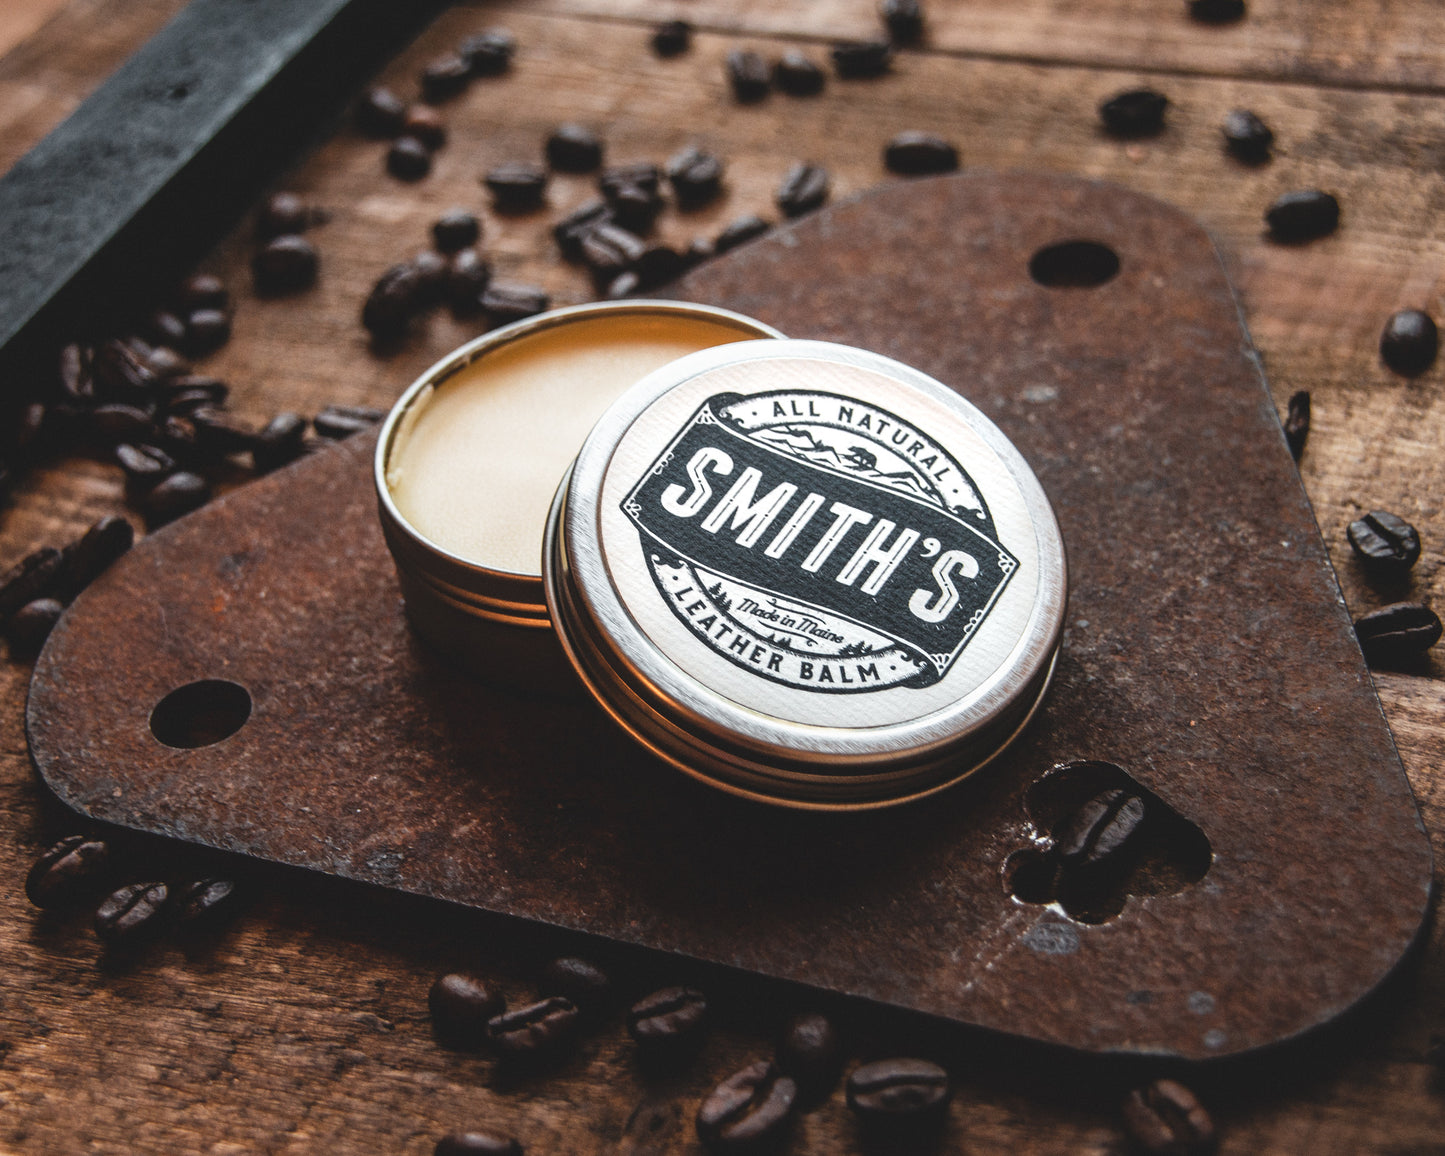 Smiths All Natural Leather Balm